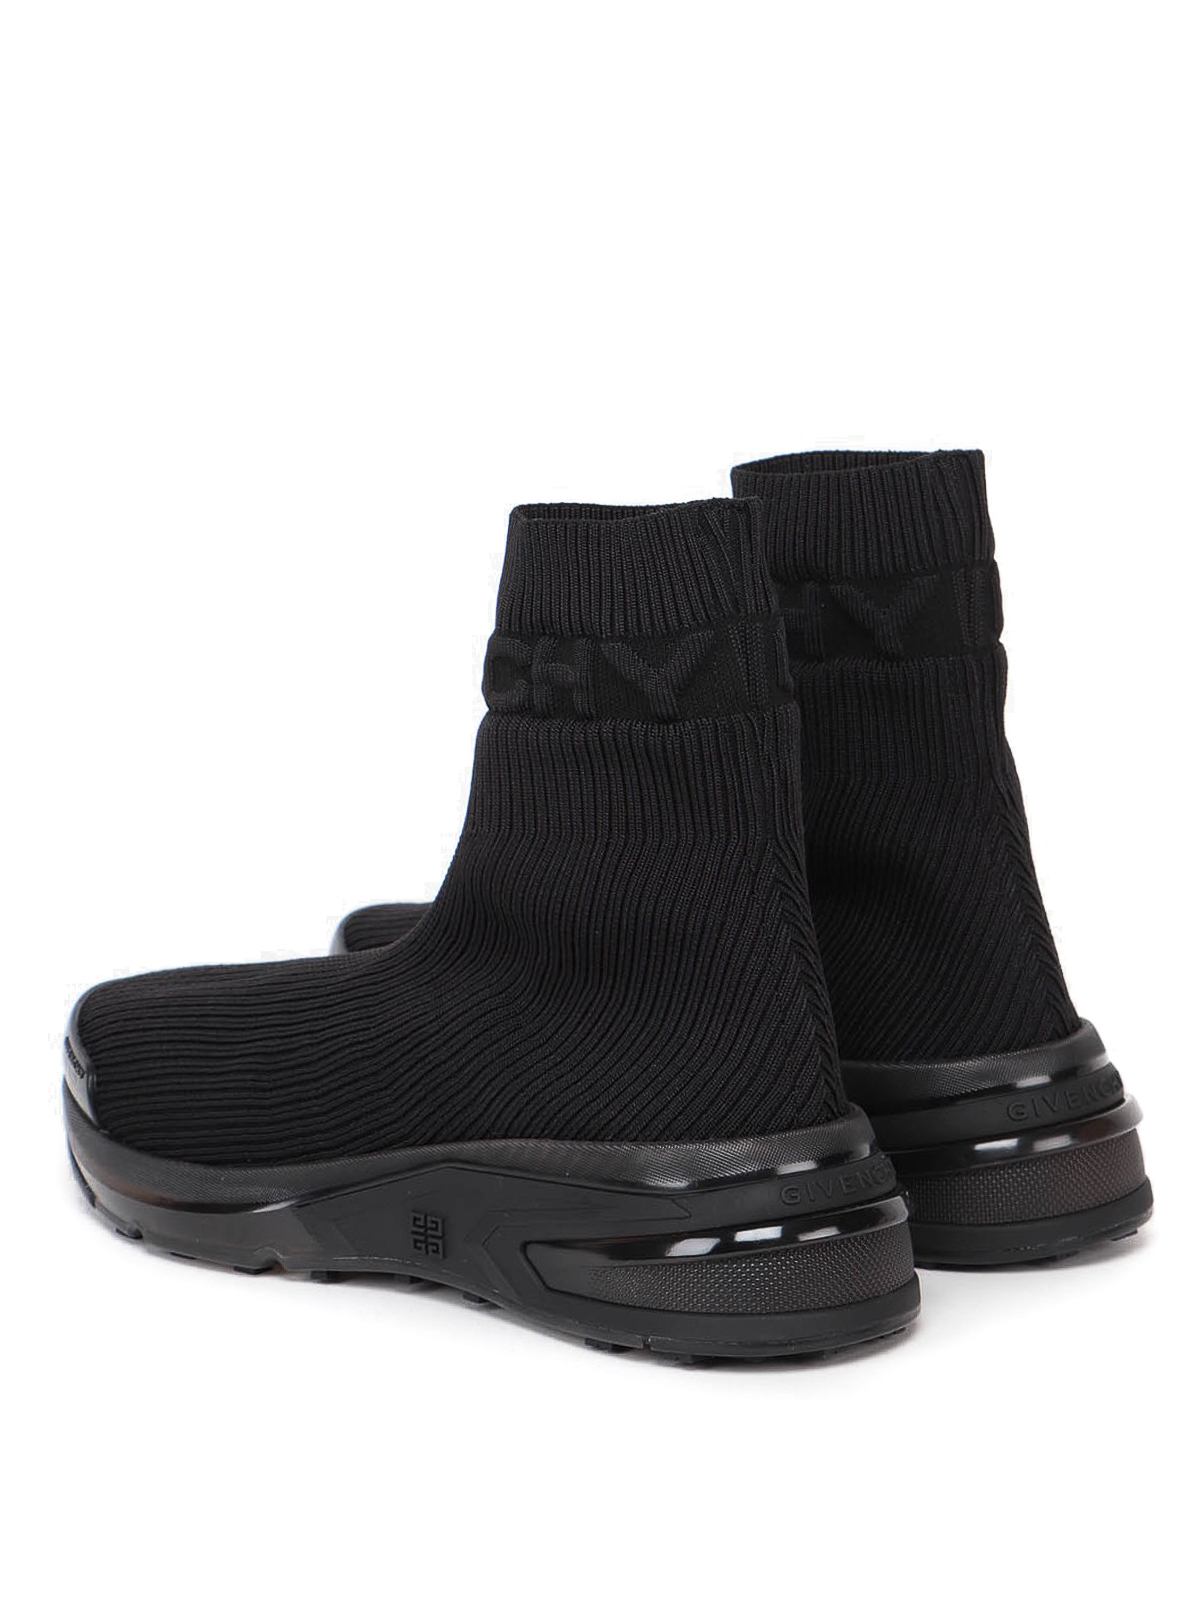 har taget fejl ketcher Phobia Trainers Givenchy - Giv 1 sock sneakers - BE001XE122001